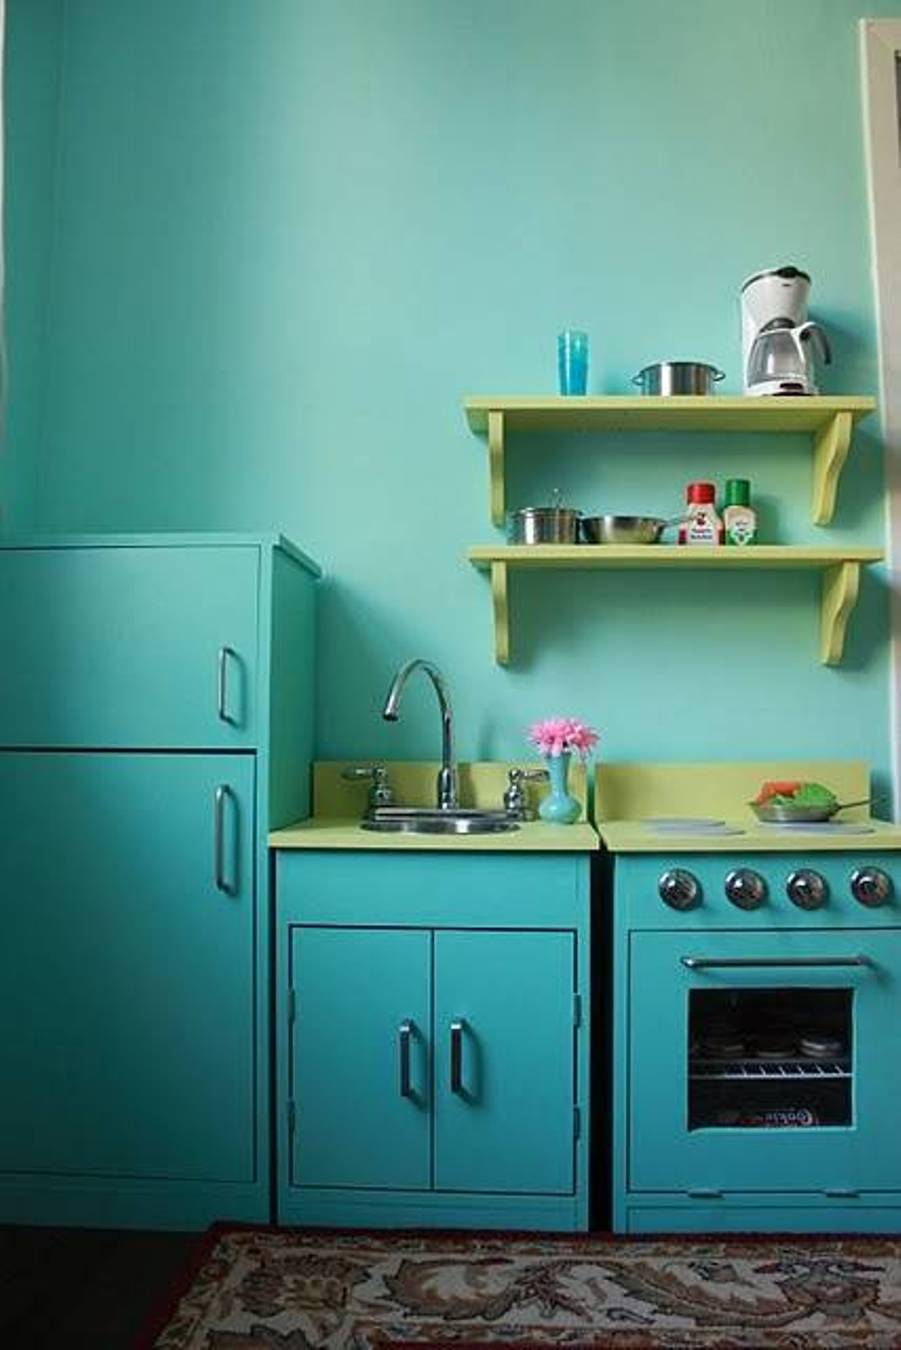 Check Out These 10 Kitchen Trends For 2016